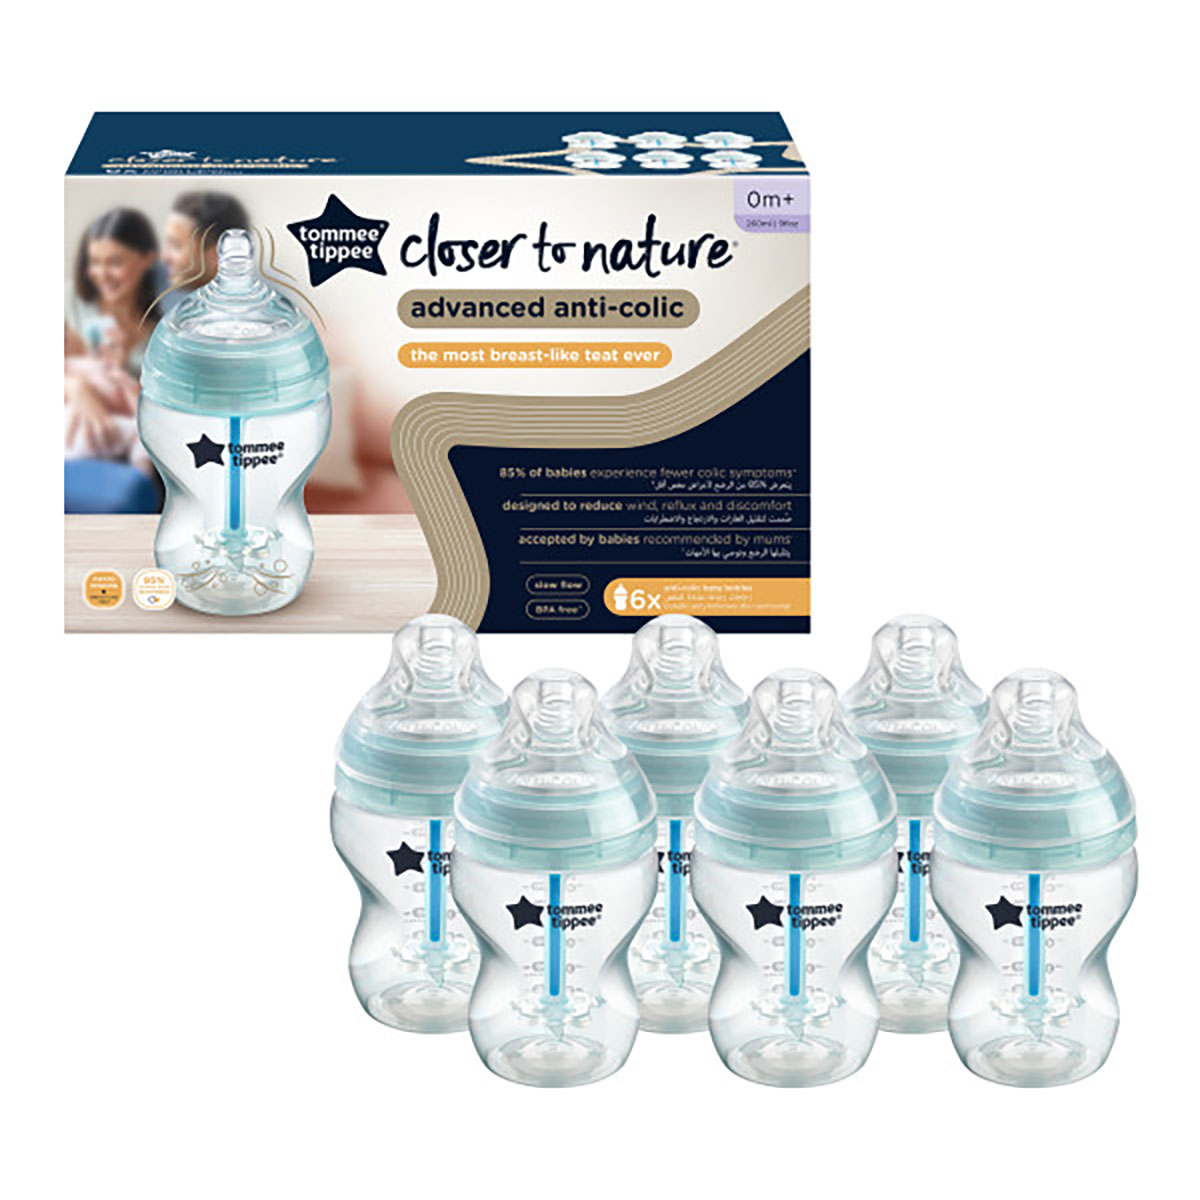 Tommee Tippee Closer to Nature 6 Pack (260ml) Anti-Colic Baby Bottles - Blue